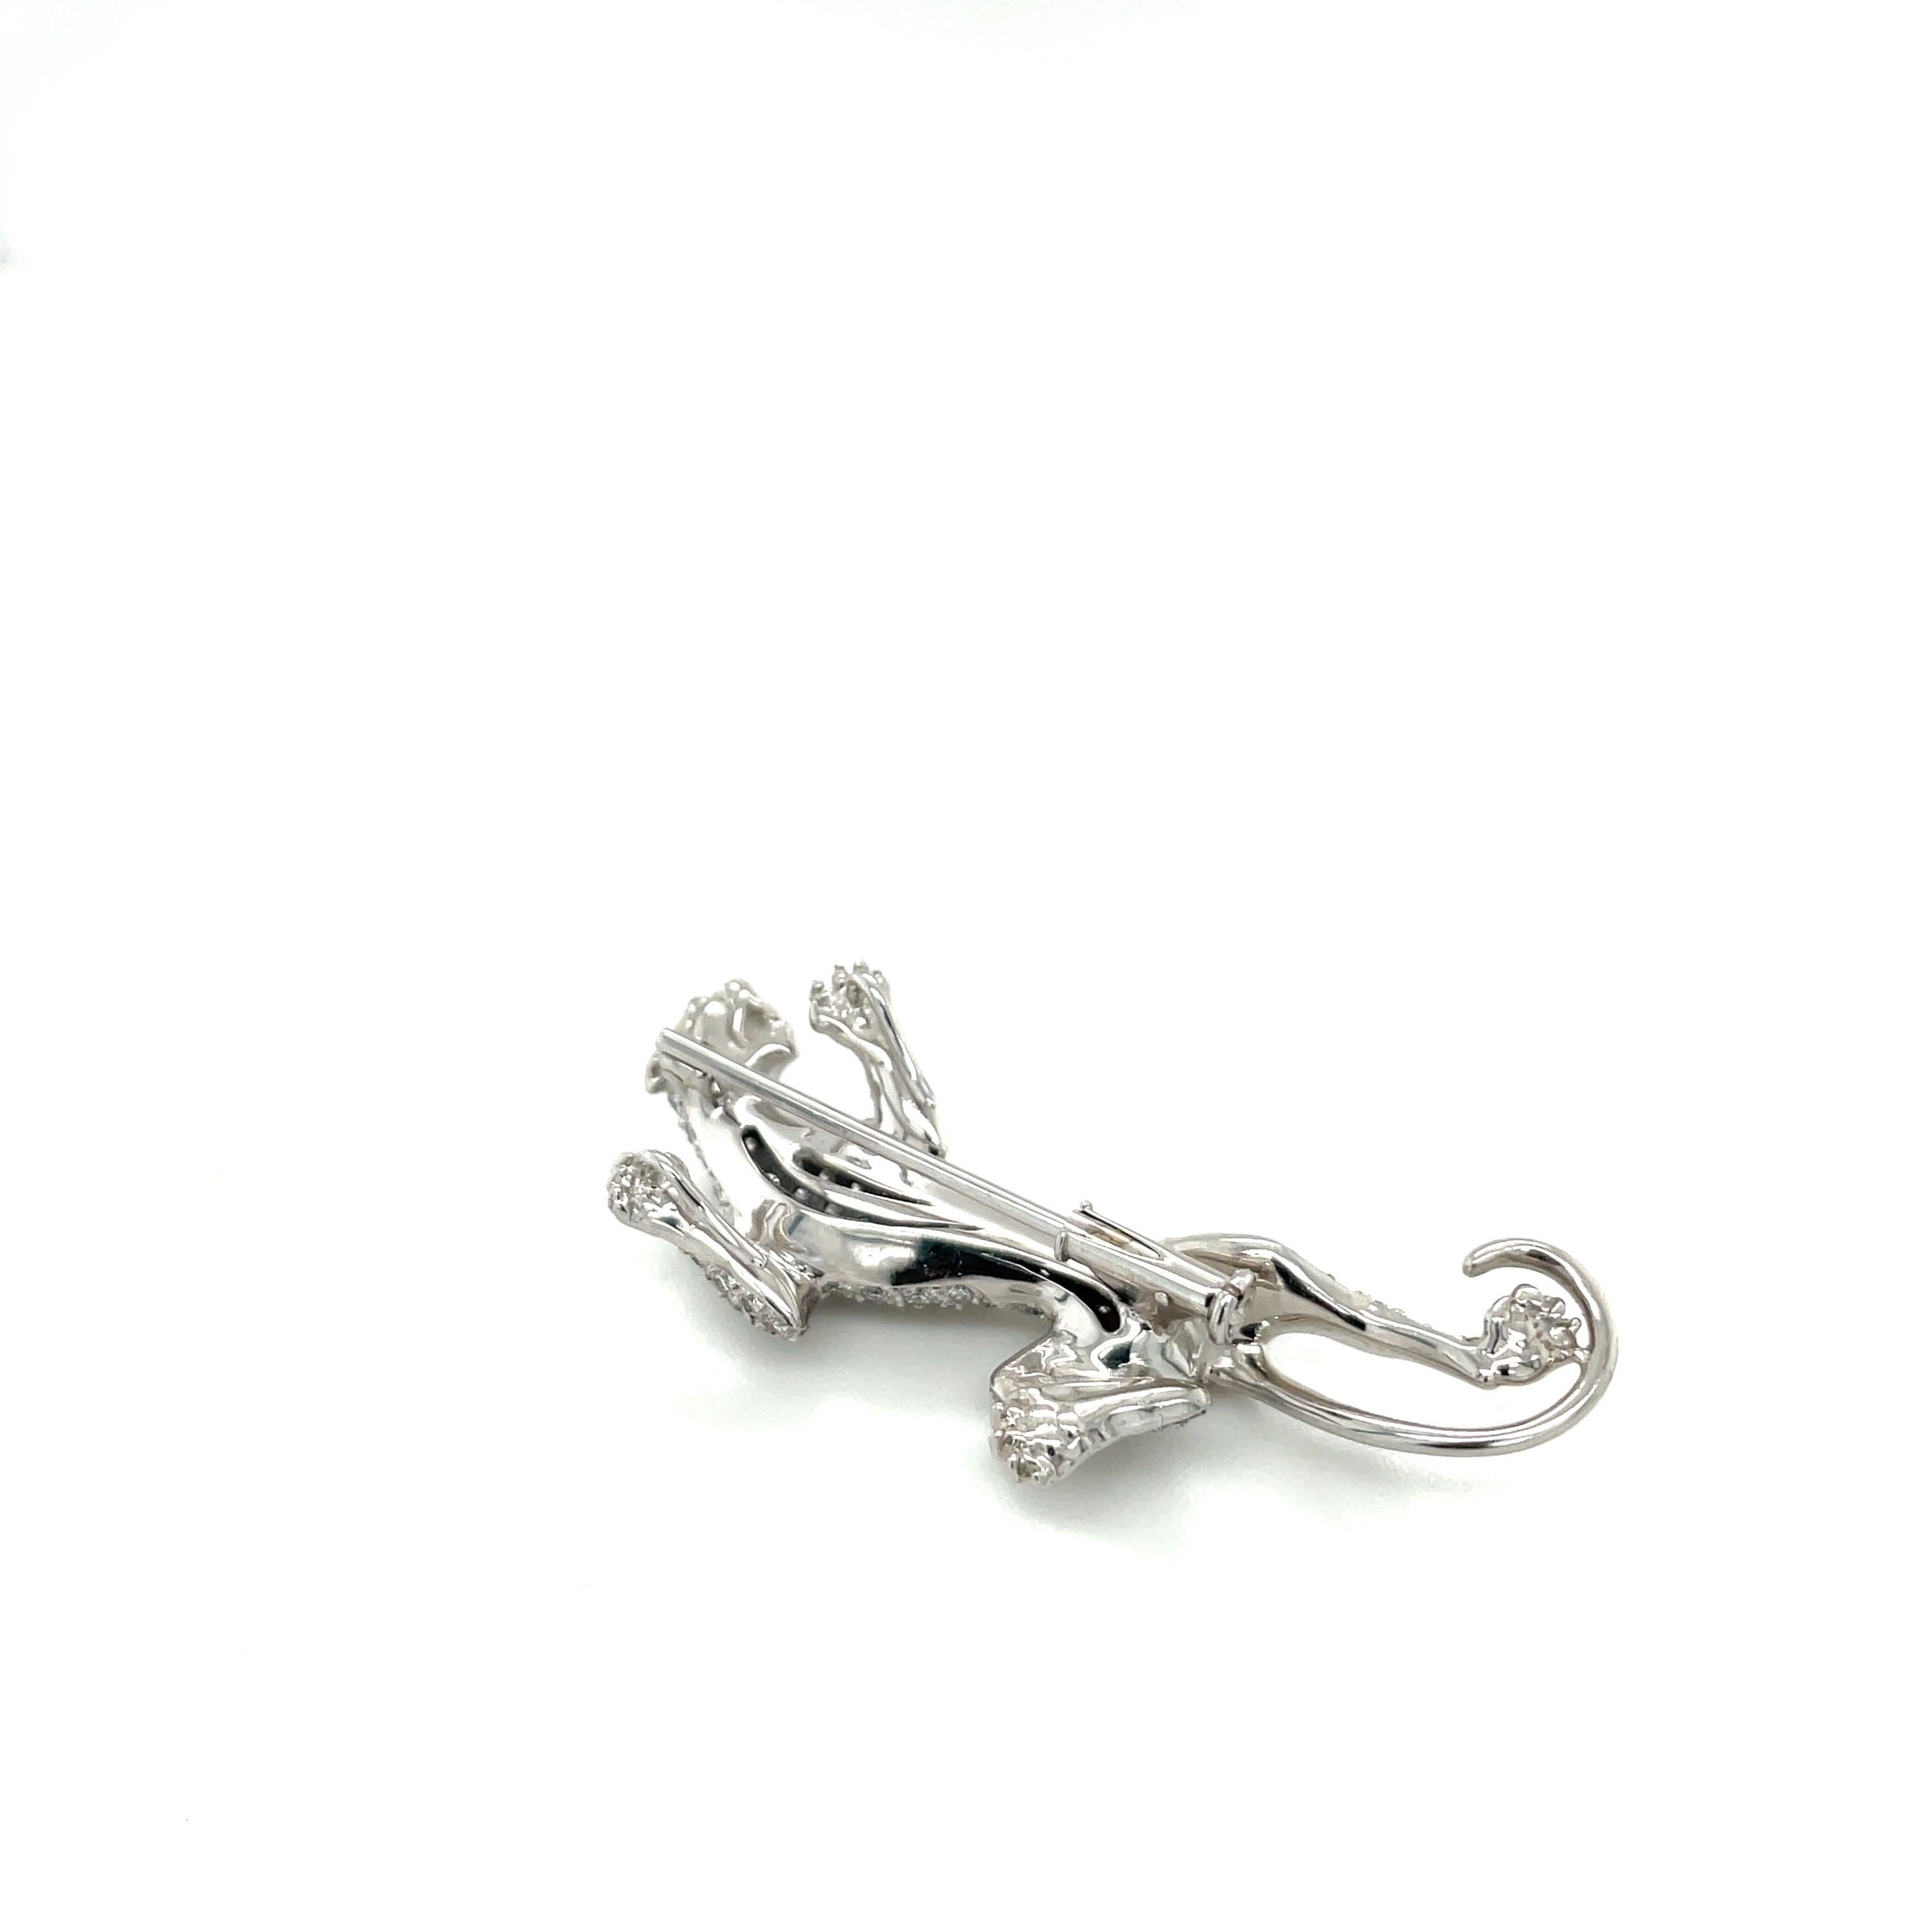 Women's or Men's Carrera y Carrera 18kt White Gold 1.56ct. Diamond Panther Pendant / Brooch